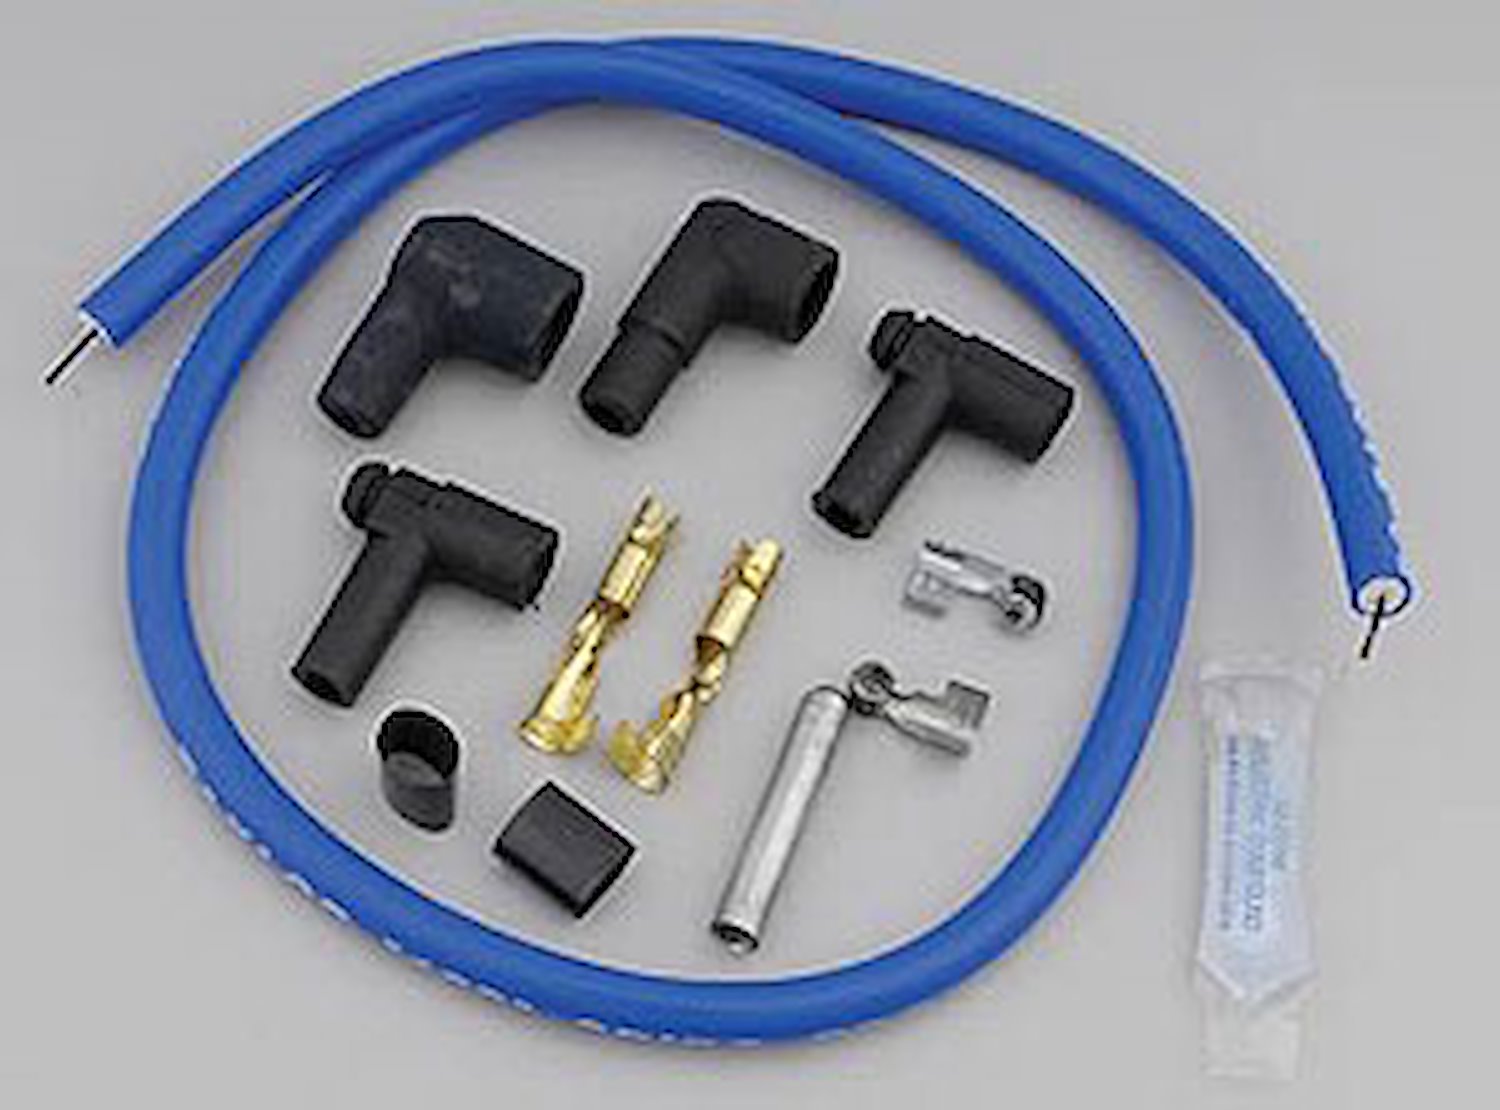 Spiro-Pro 8mm Coil Wire Repair Kit HEI & Socket Style Distributor Ends